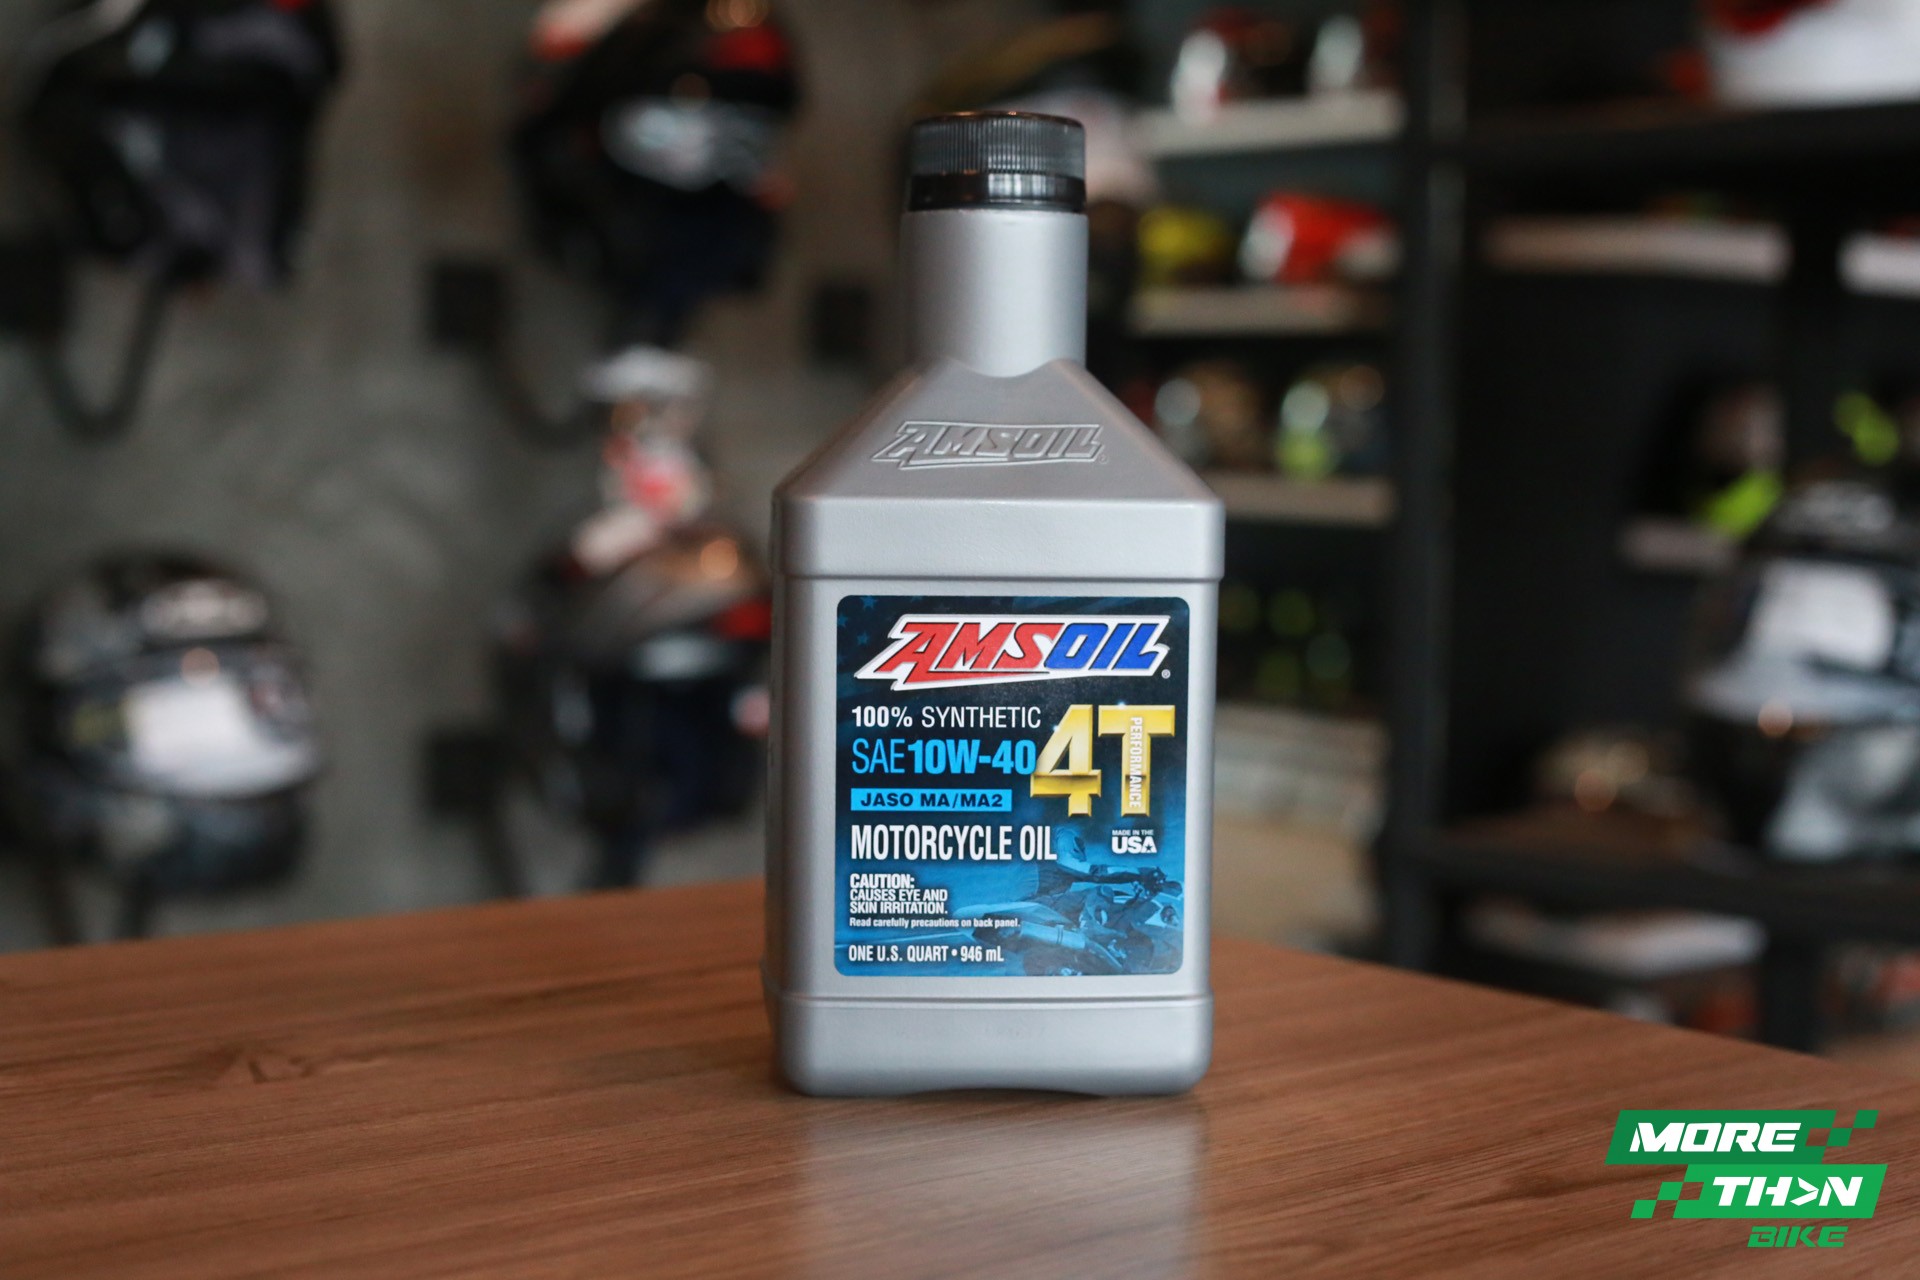 Mobil1 racing 4t 10w40 vs Amsoil 4t 10w40 on r1200gs lc - Bob Is The